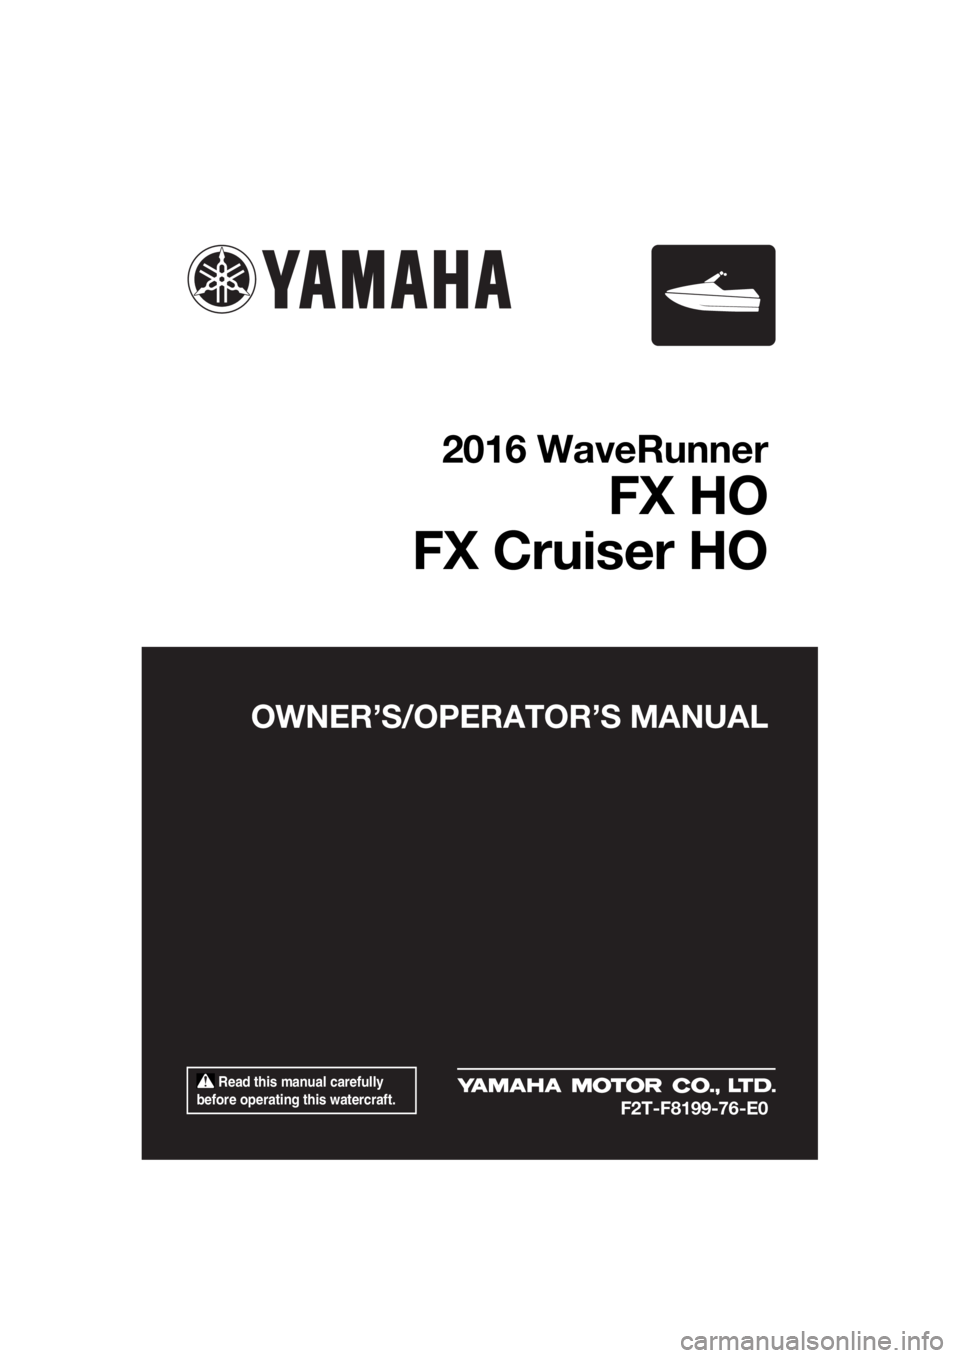 YAMAHA FX HO 2016  Owners Manual  Read this manual carefully 
before operating this watercraft.
OWNER’S/OPERATOR’S MANUAL
2016 WaveRunner
FX HO
FX Cruiser HO
F2T-F8199-76-E0
UF2T76E0.book  Page 1  Wednesday, September 9, 2015  5: